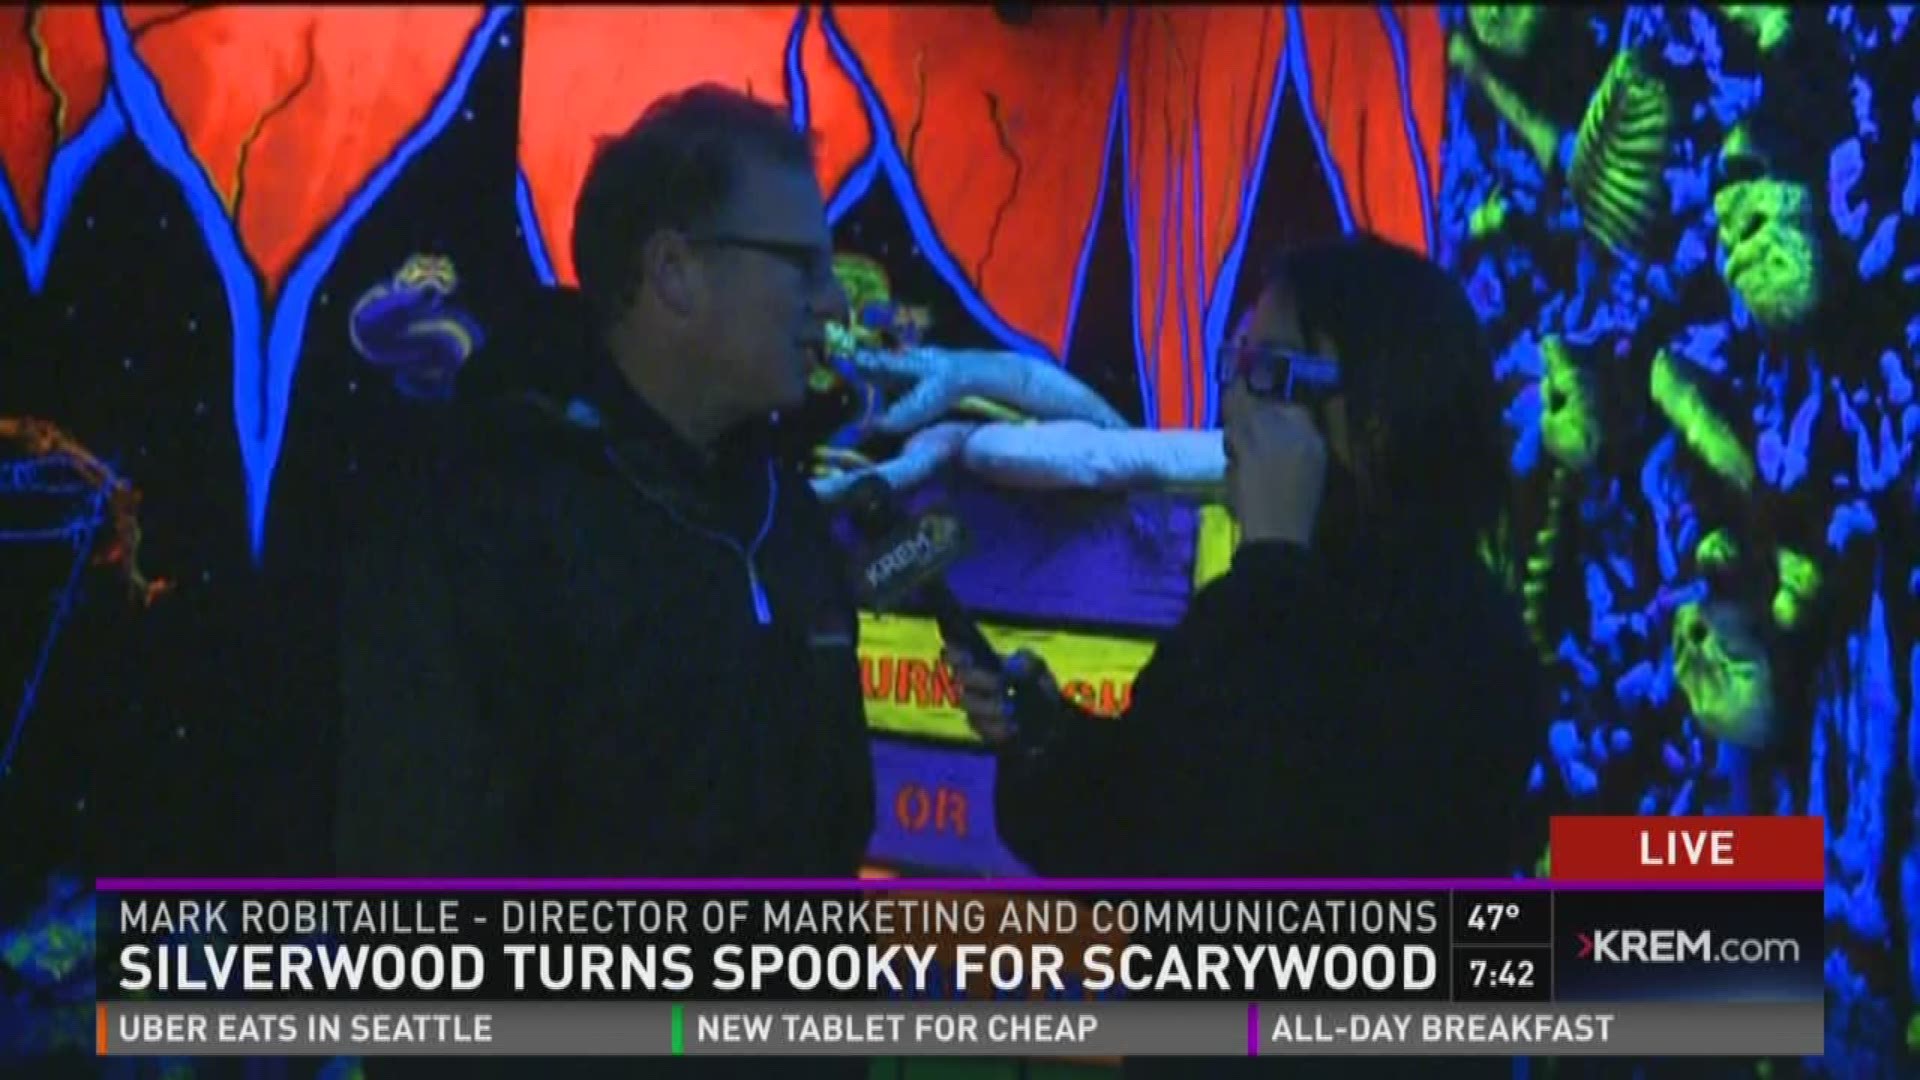 Silverwood gets spooky for Scarywood